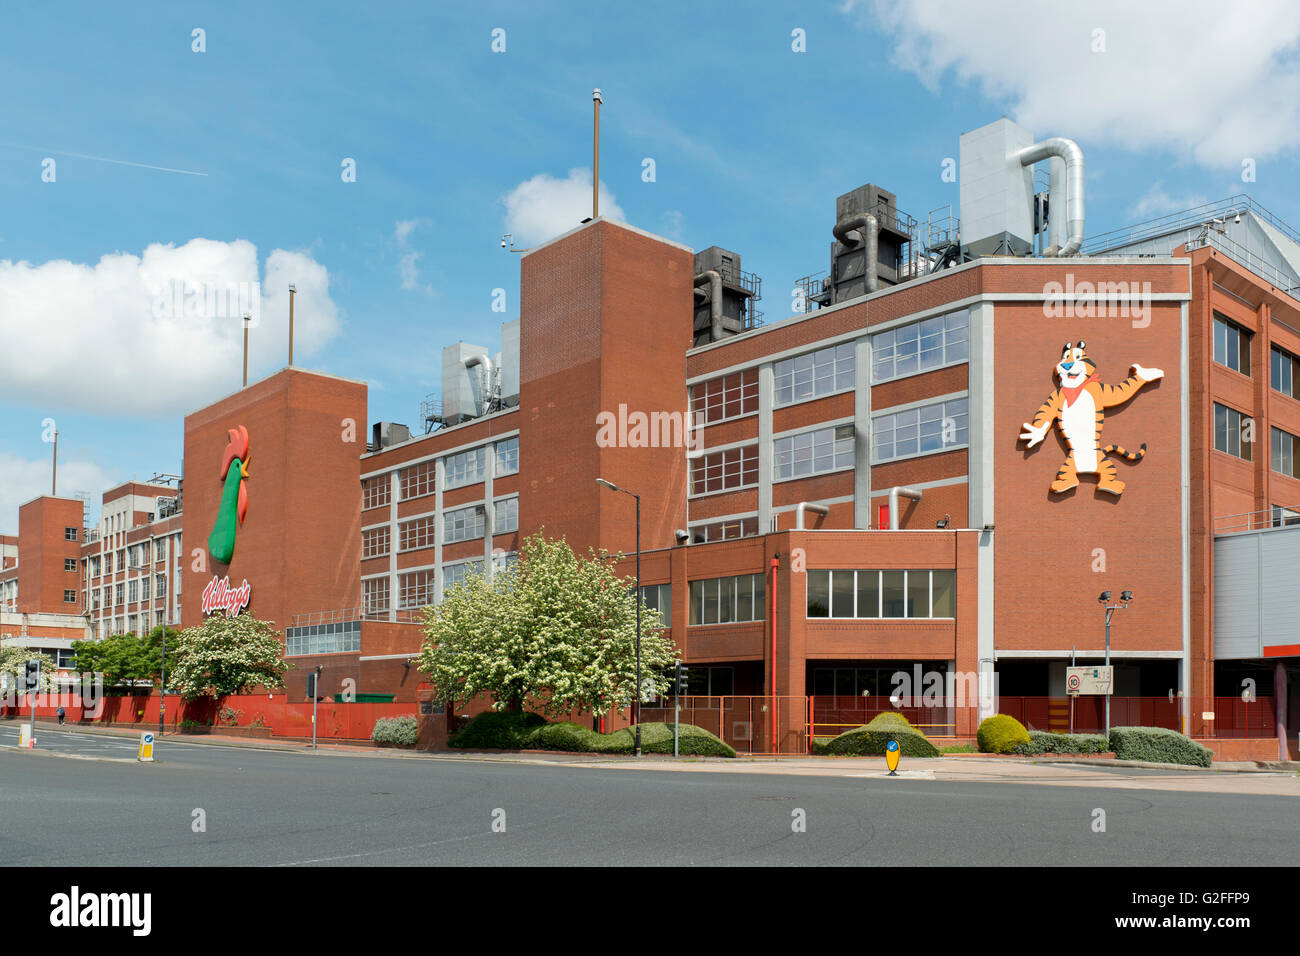 The Kellogg's factory located on Barton Dock Road between the areas of Stretford and Trafford Park in Greater Manchester, UK. Stock Photo